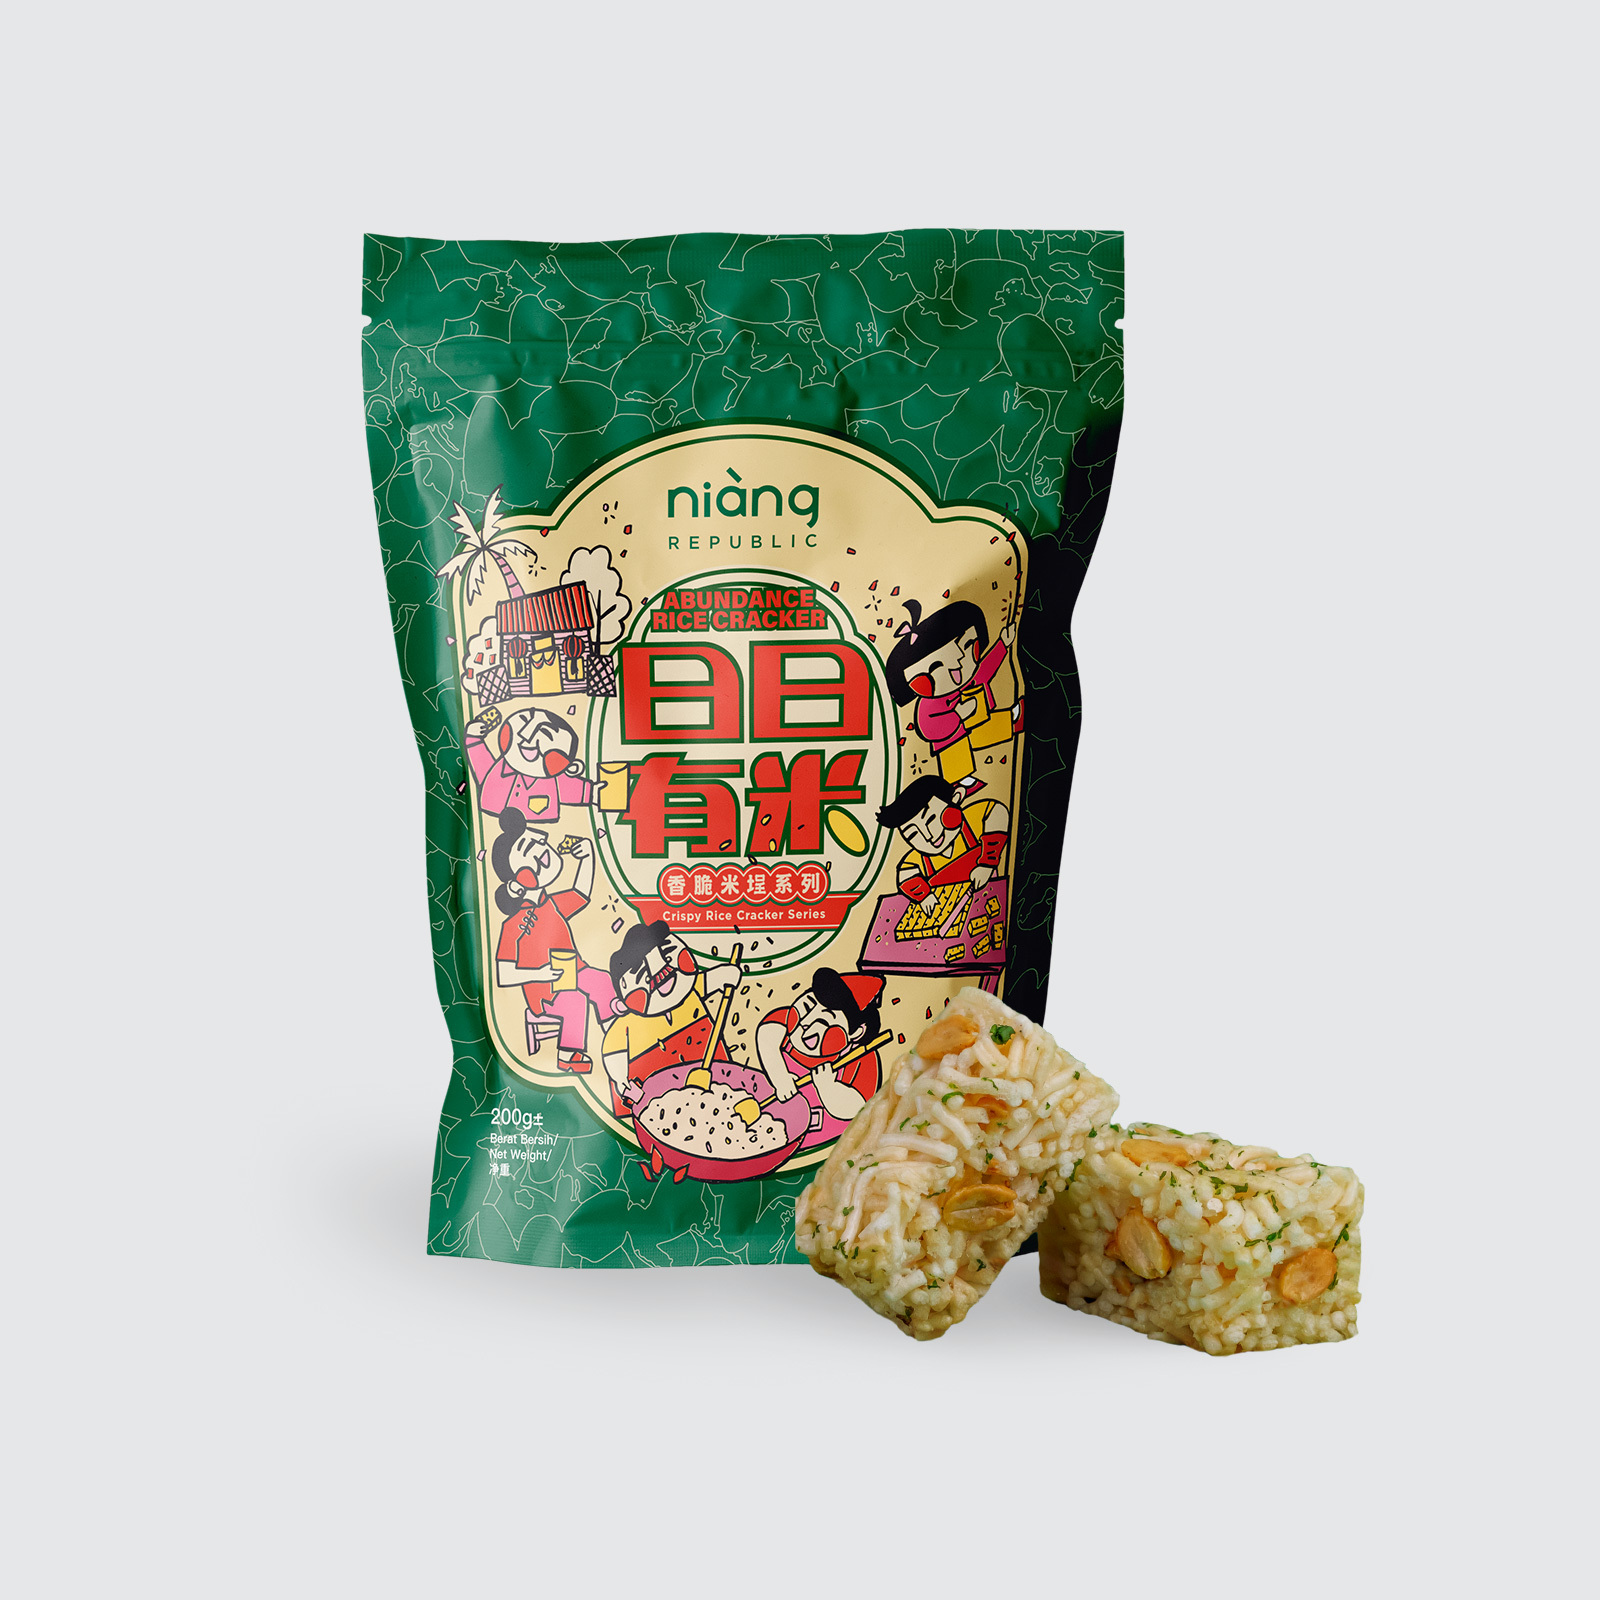 rice-cracker-1product-categories